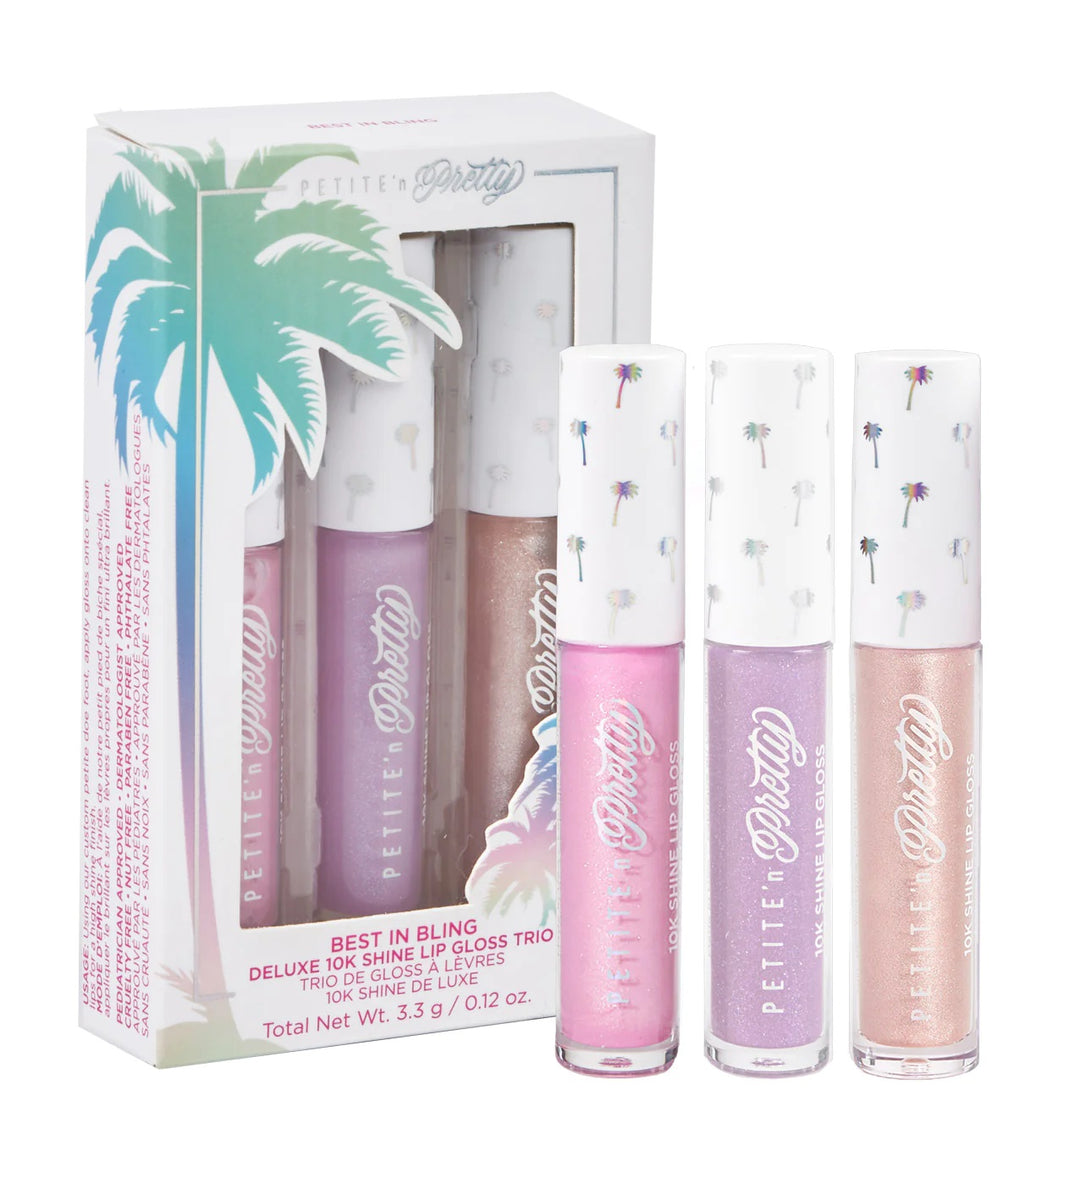 Petite and Pretty Best in Bling Deluxe 10K Shine Lip Gloss Trio